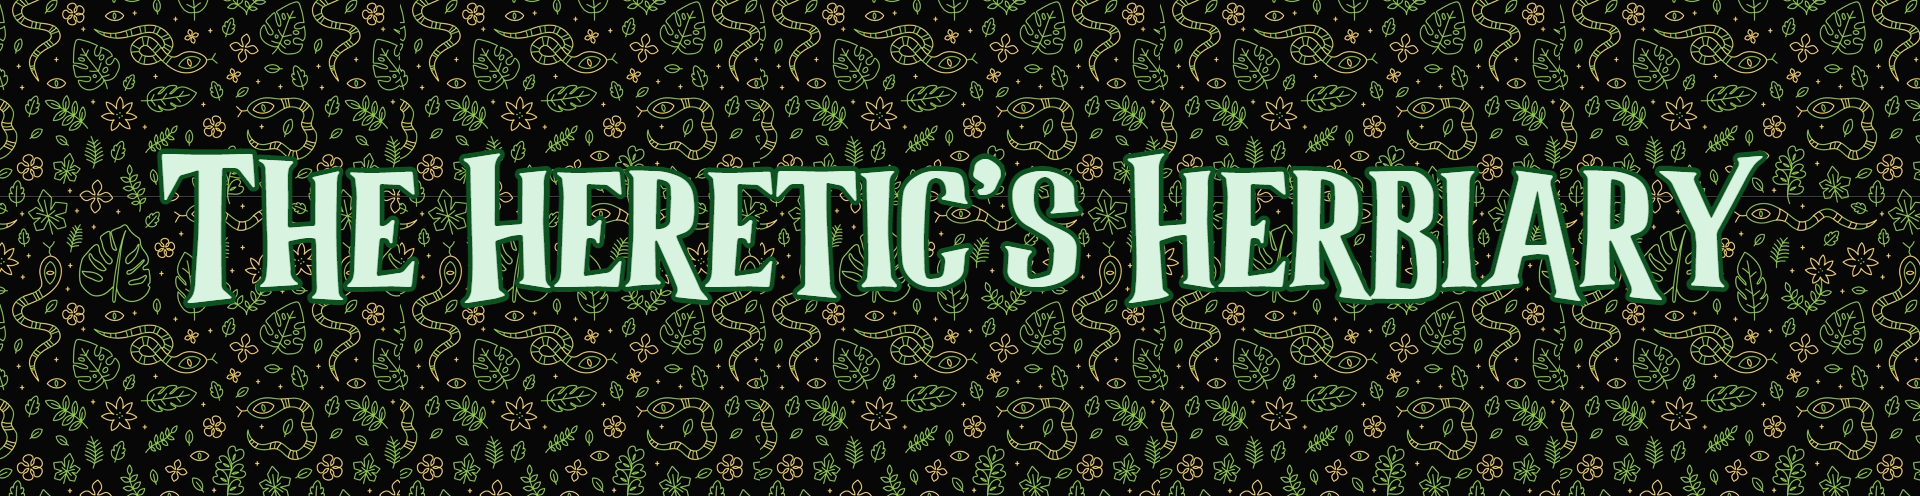 The Heretic's Herbiary vol #03